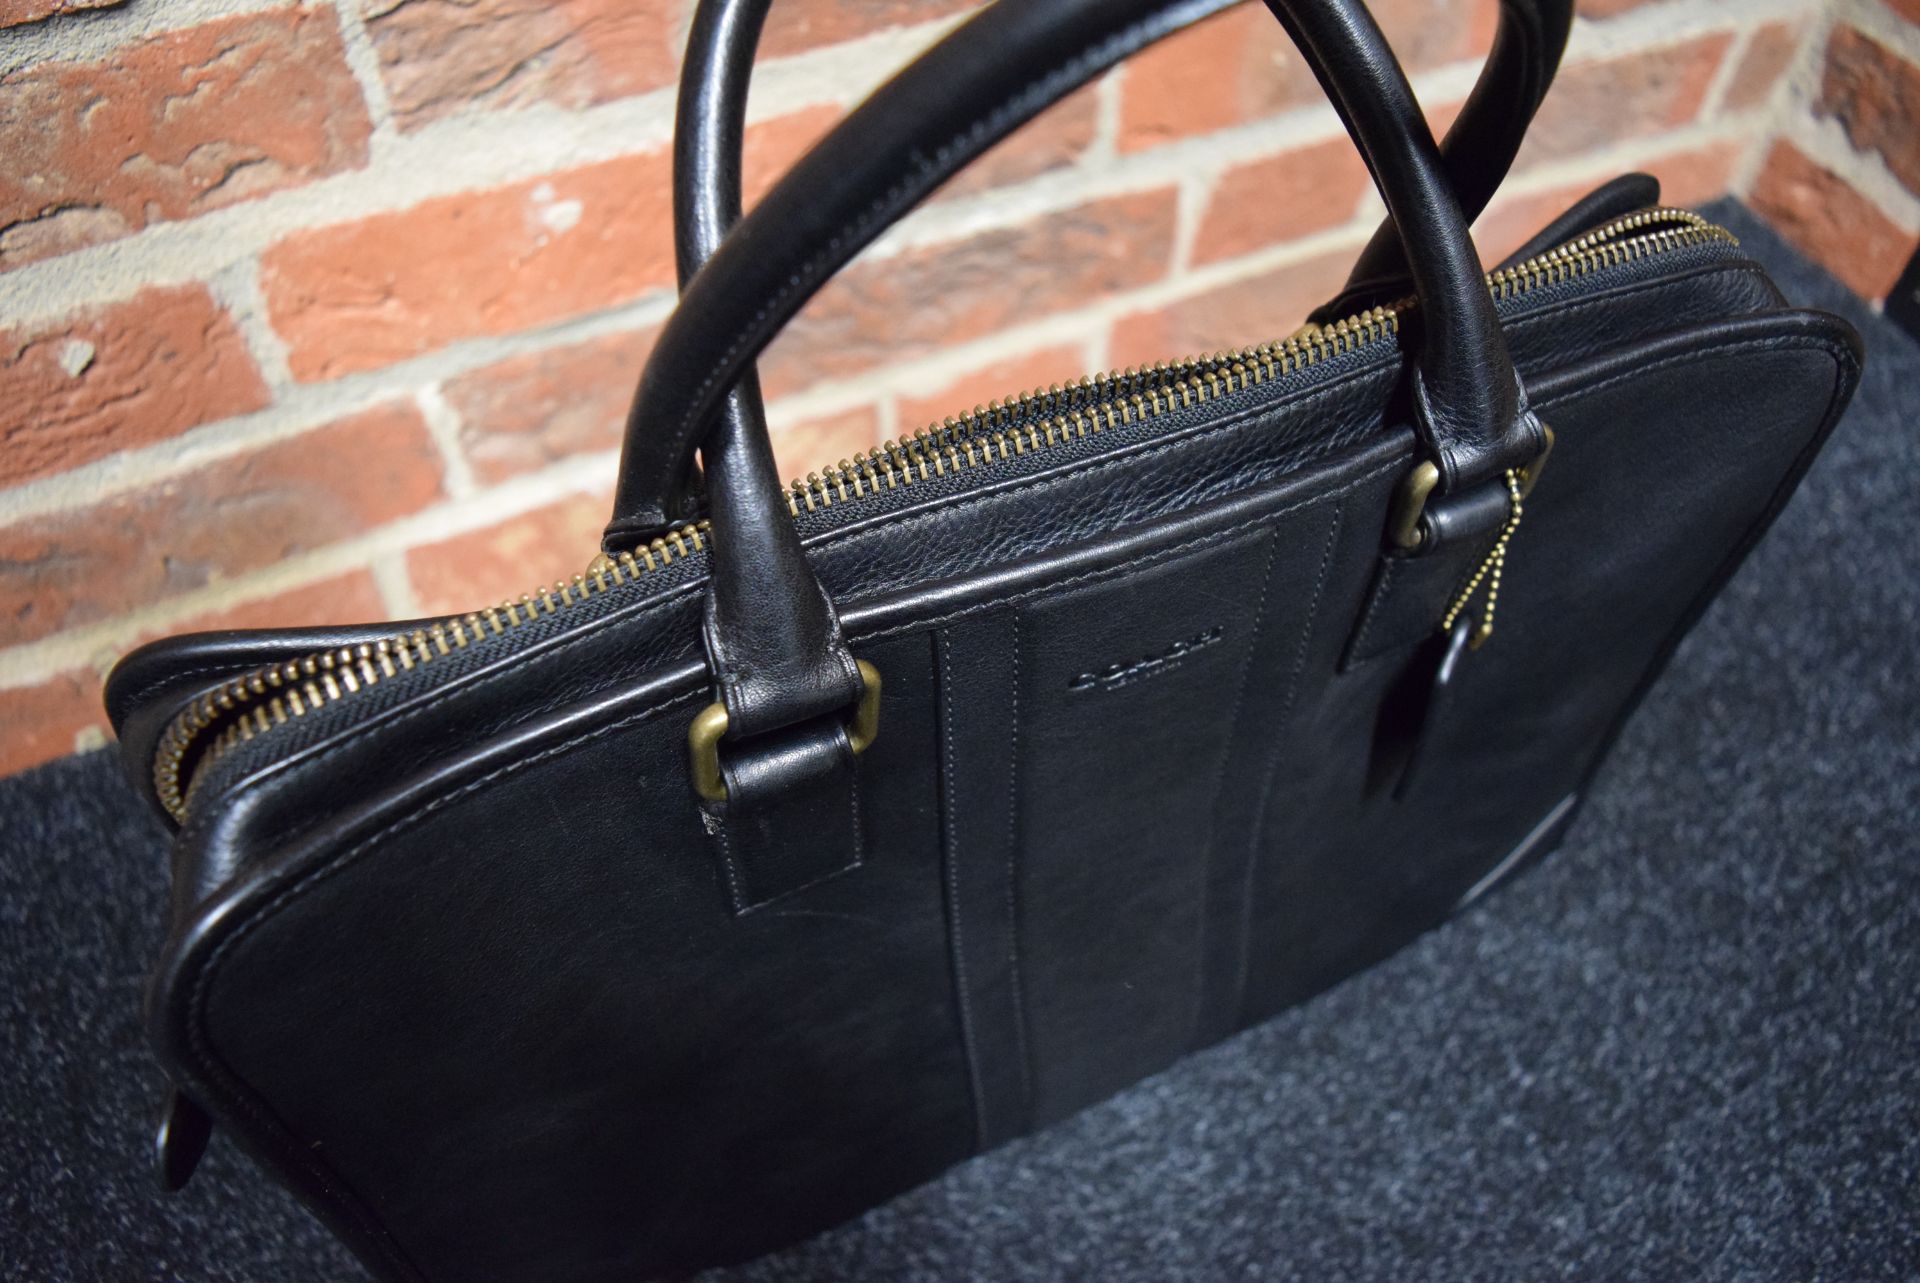 COACH NEW YORK BLACK LEATHER/ BRASS LAPTOP / DOCUMENT BAG (HOLDALL) - AS NEW WITH COACH LEATHER TAG - Image 4 of 7